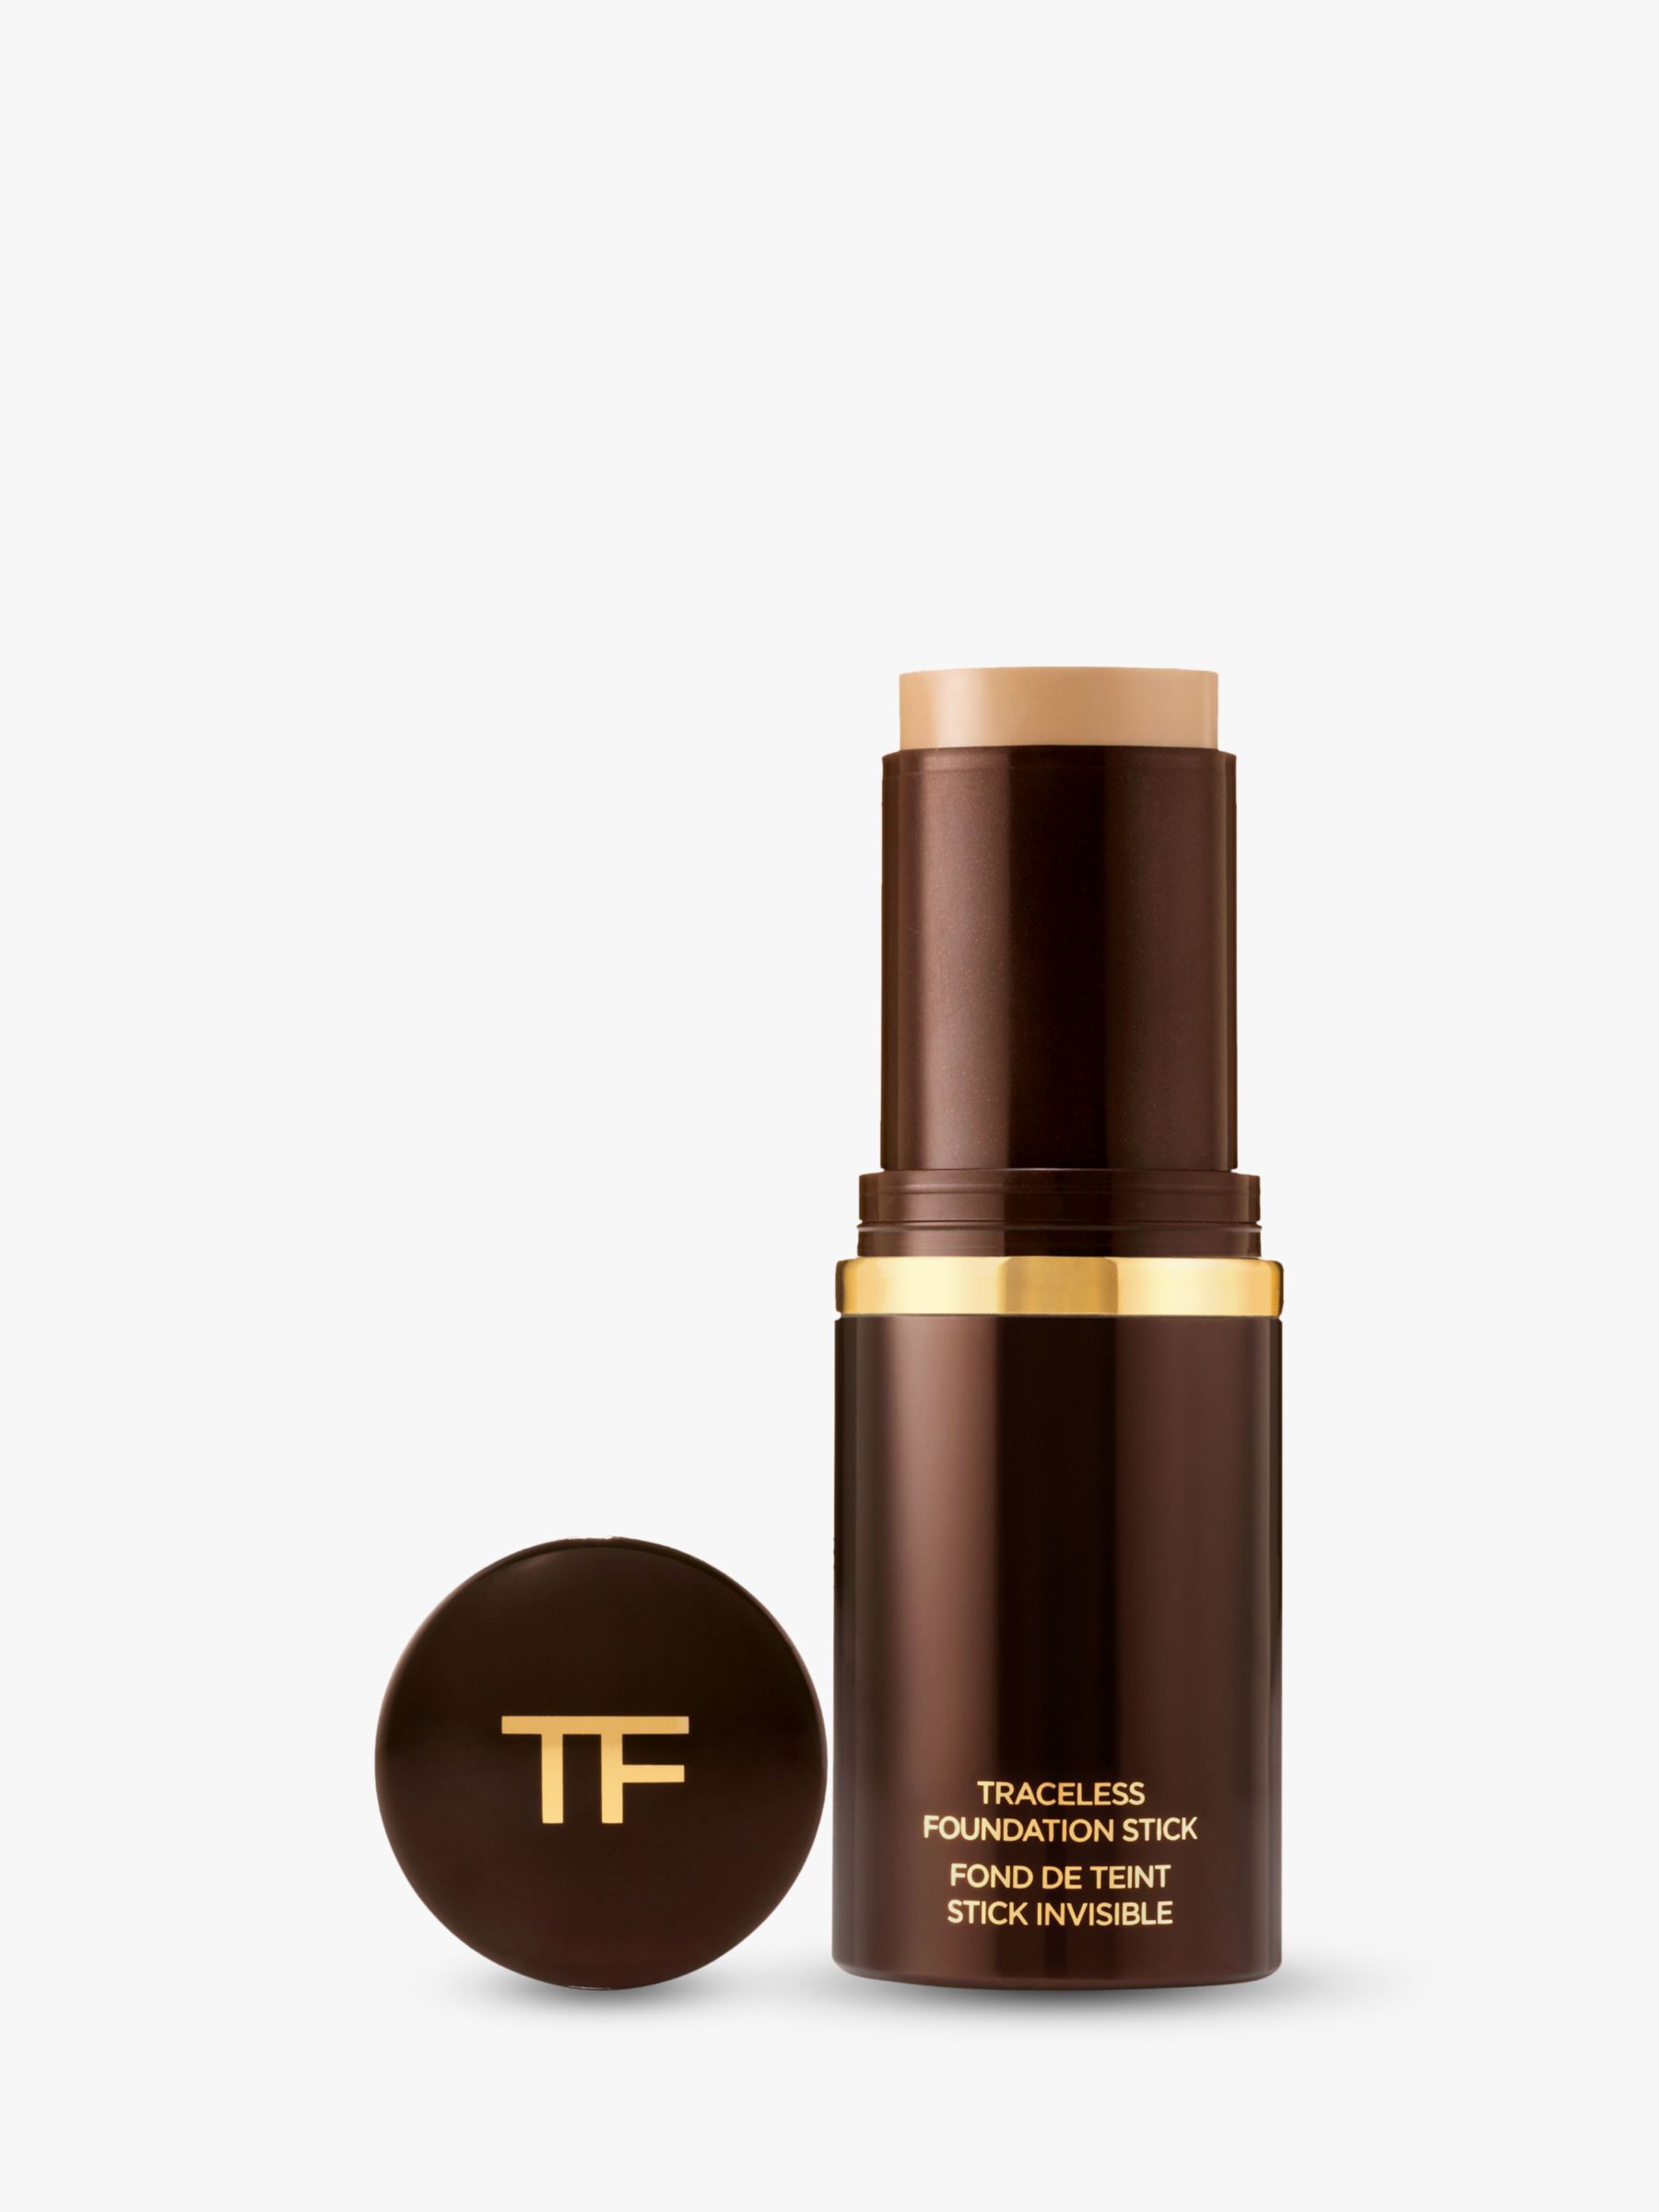 TOM FORD Traceless Foundation Stick at John Lewis & Partners